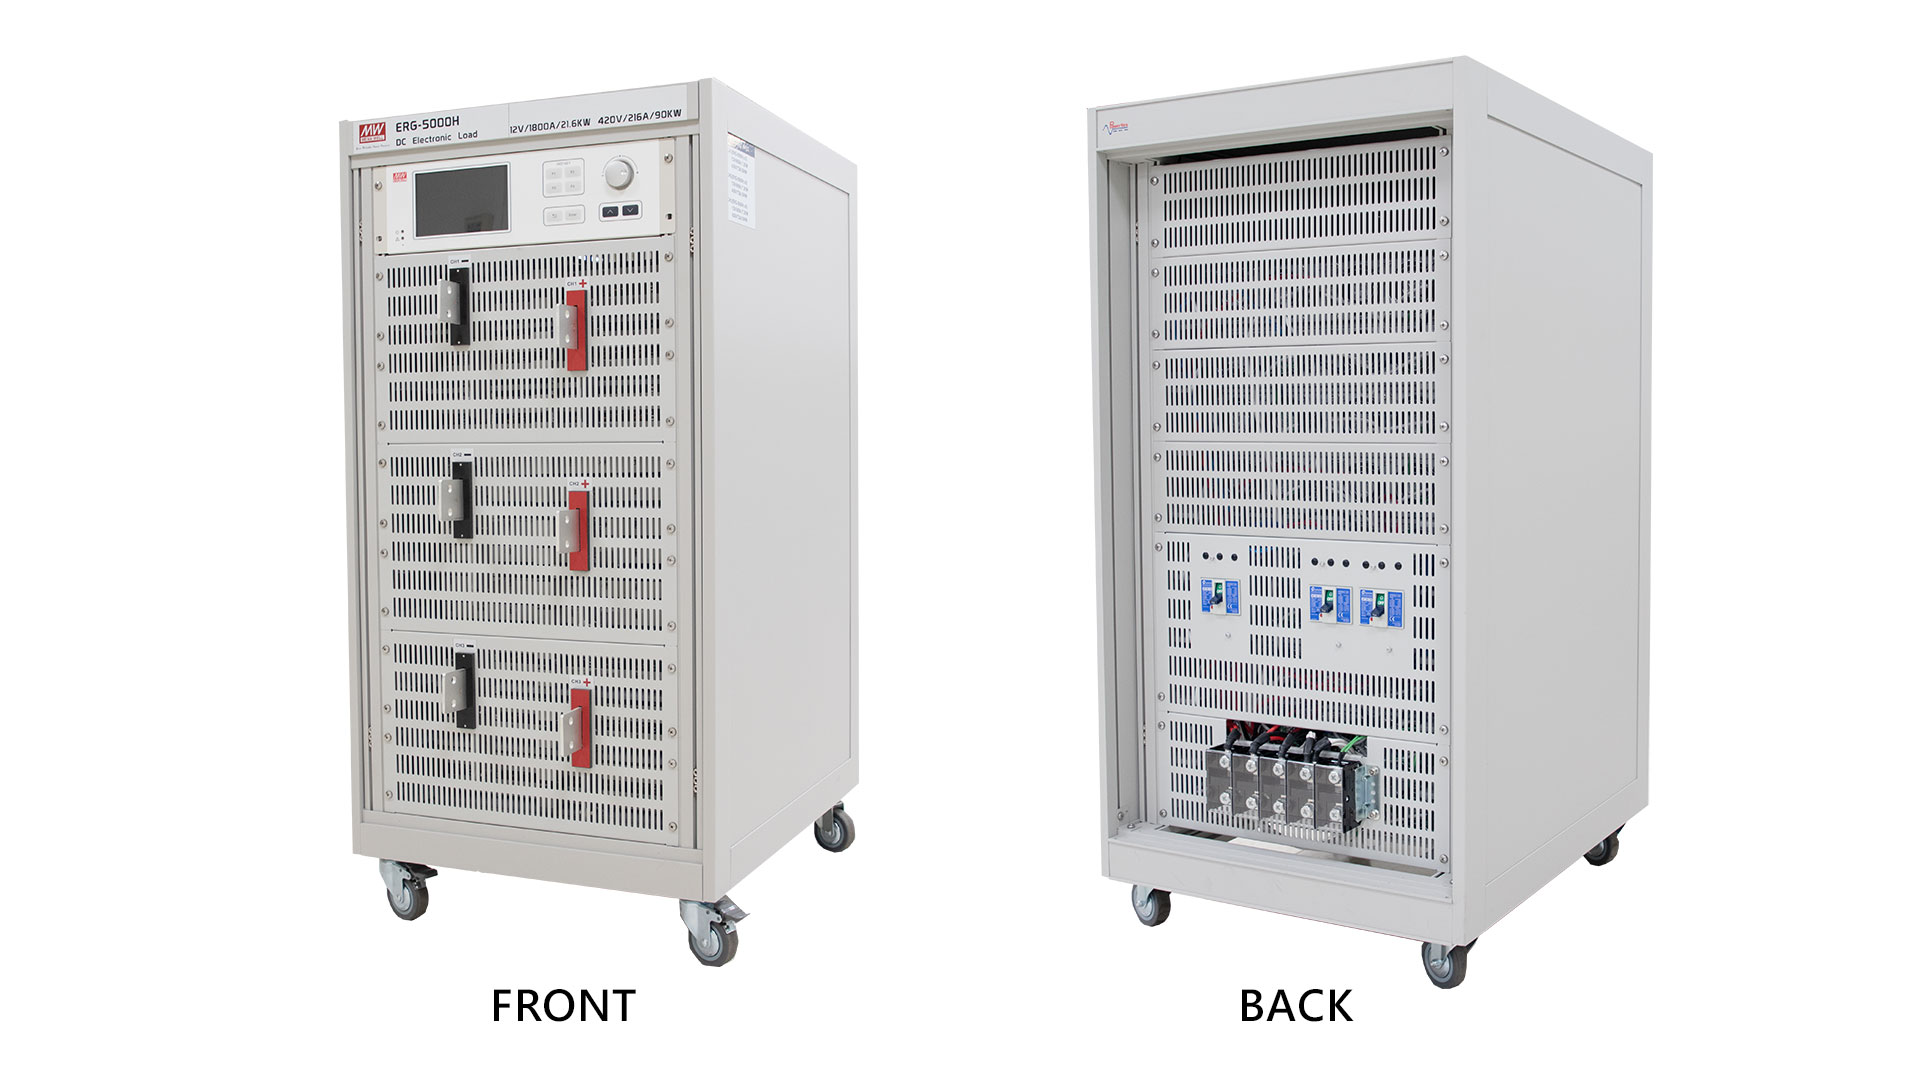 High-efficiency grid-connected aging test system and power management solution